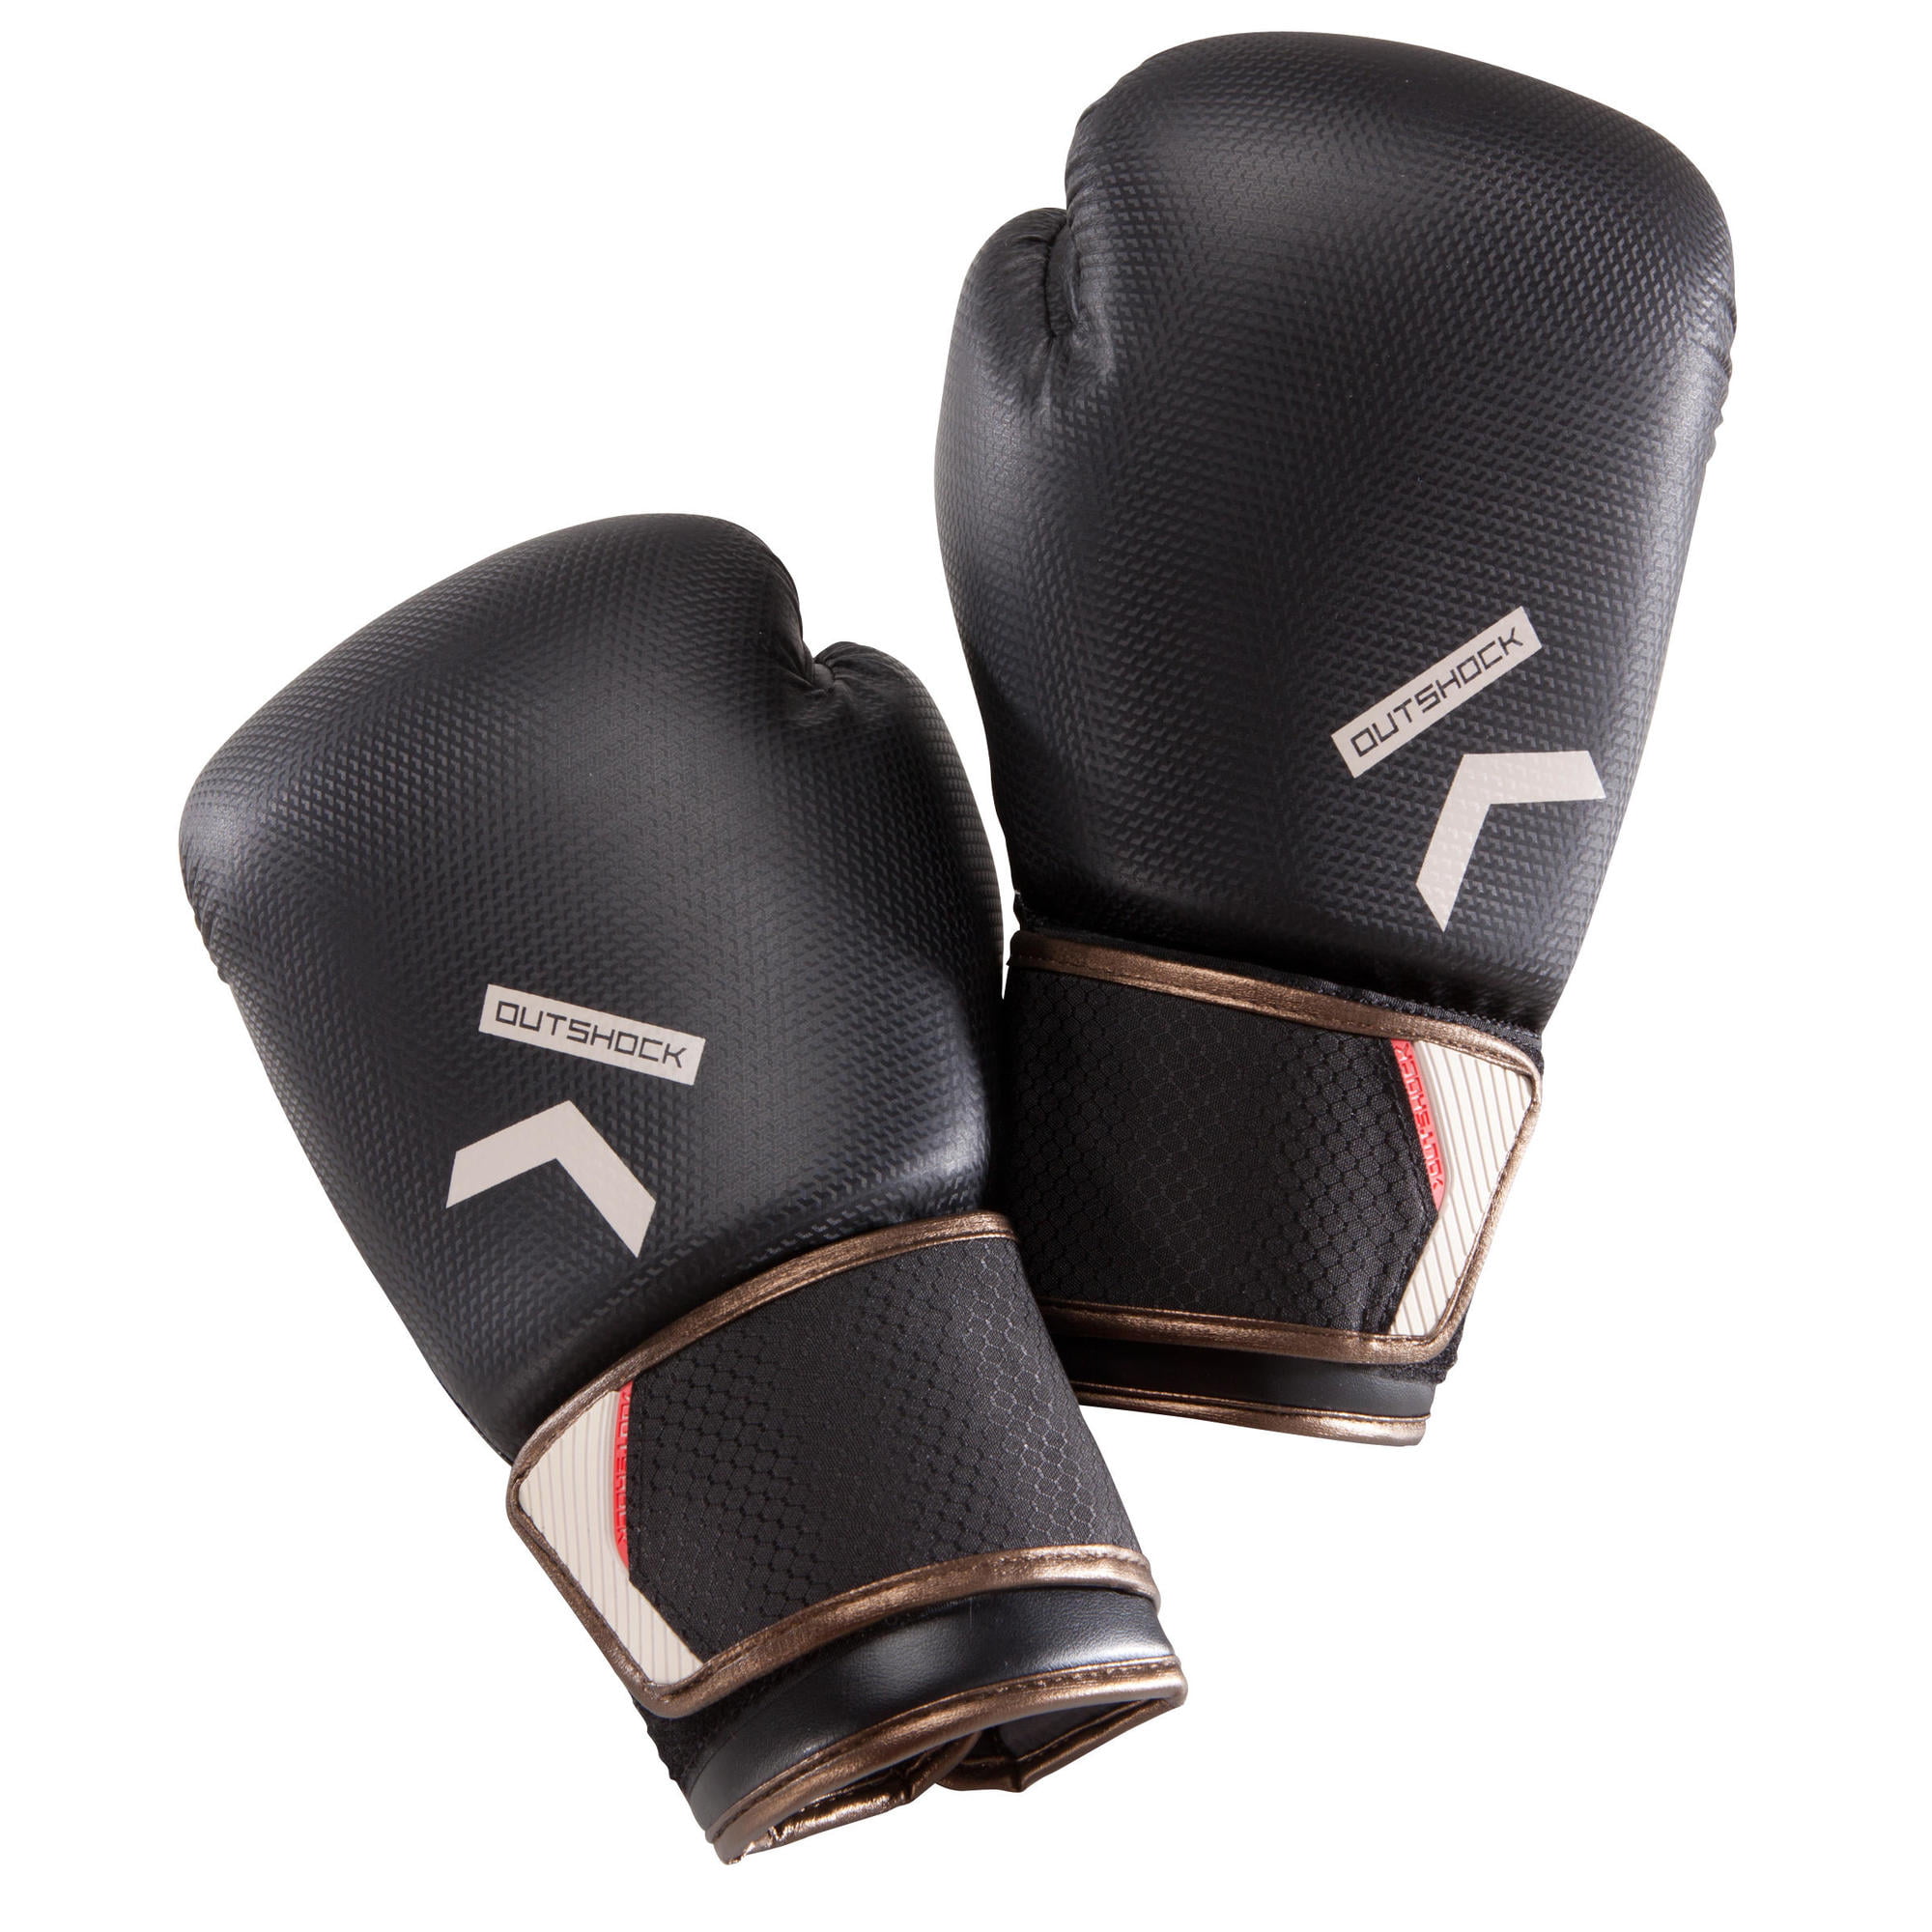 OUTSHOCK by DECATHLON - Boxing Gloves 